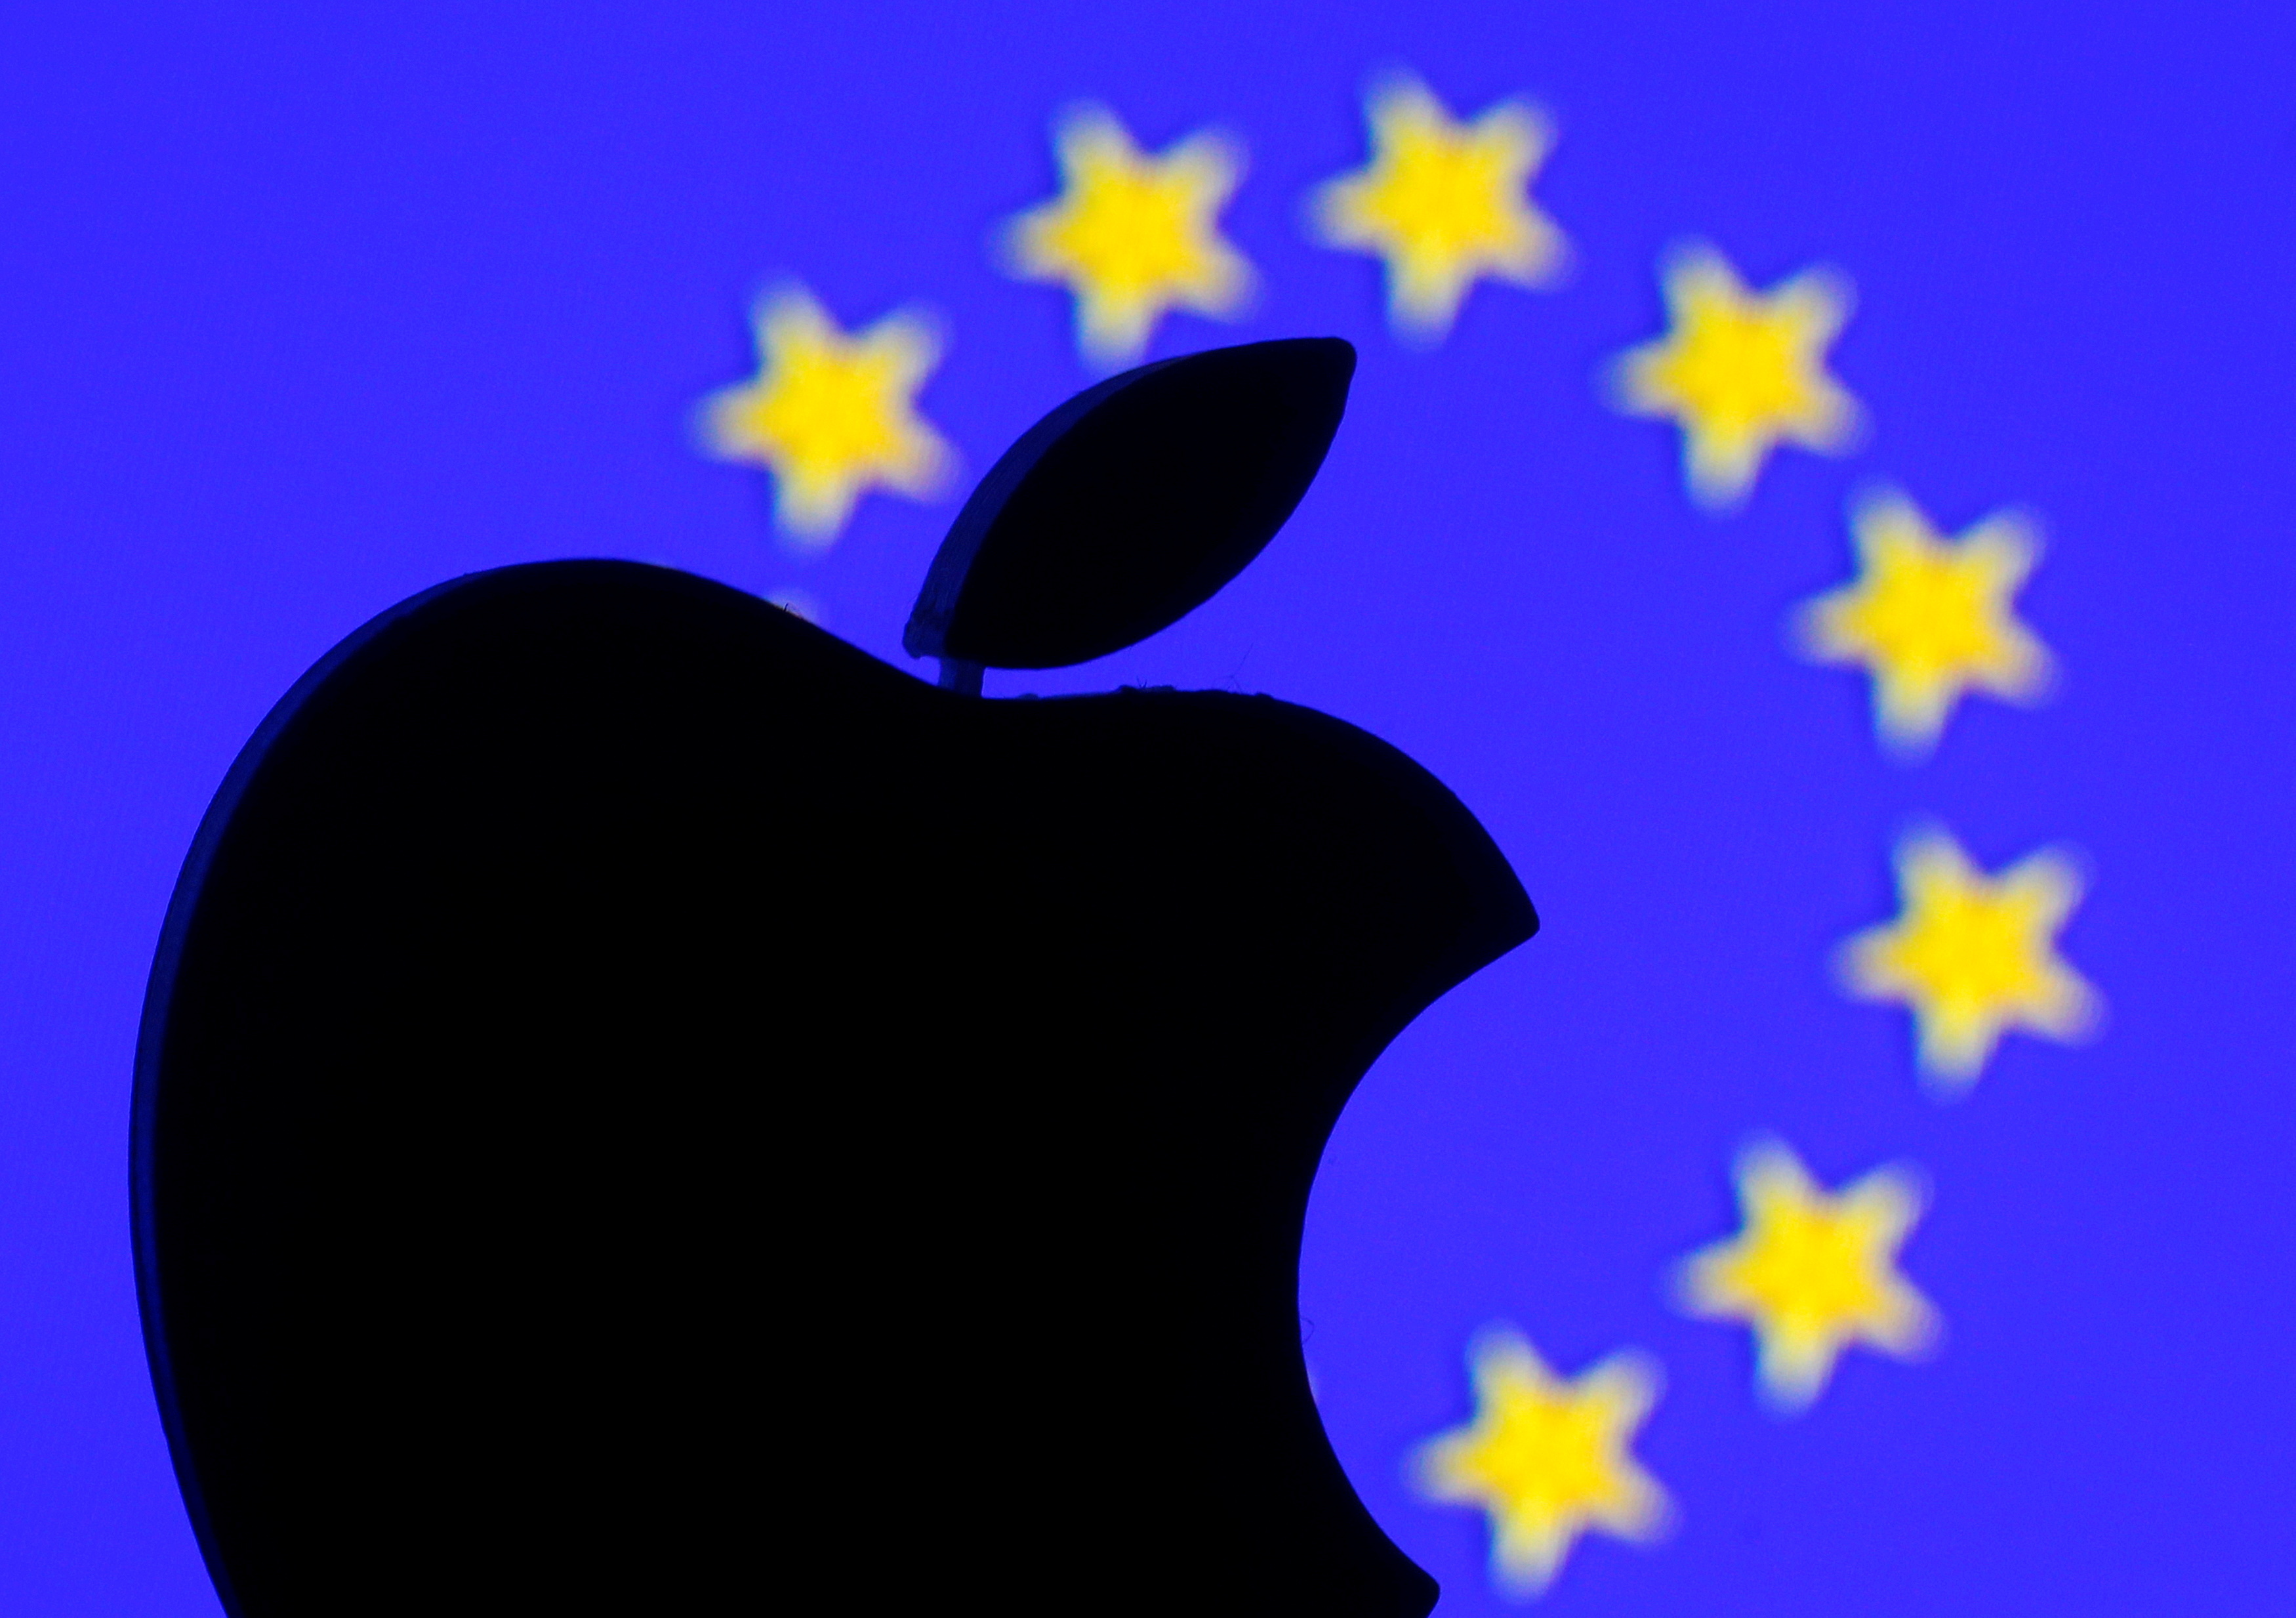 A 3D-printed Apple logo is seen in front of a displayed European Union flag in this illustration